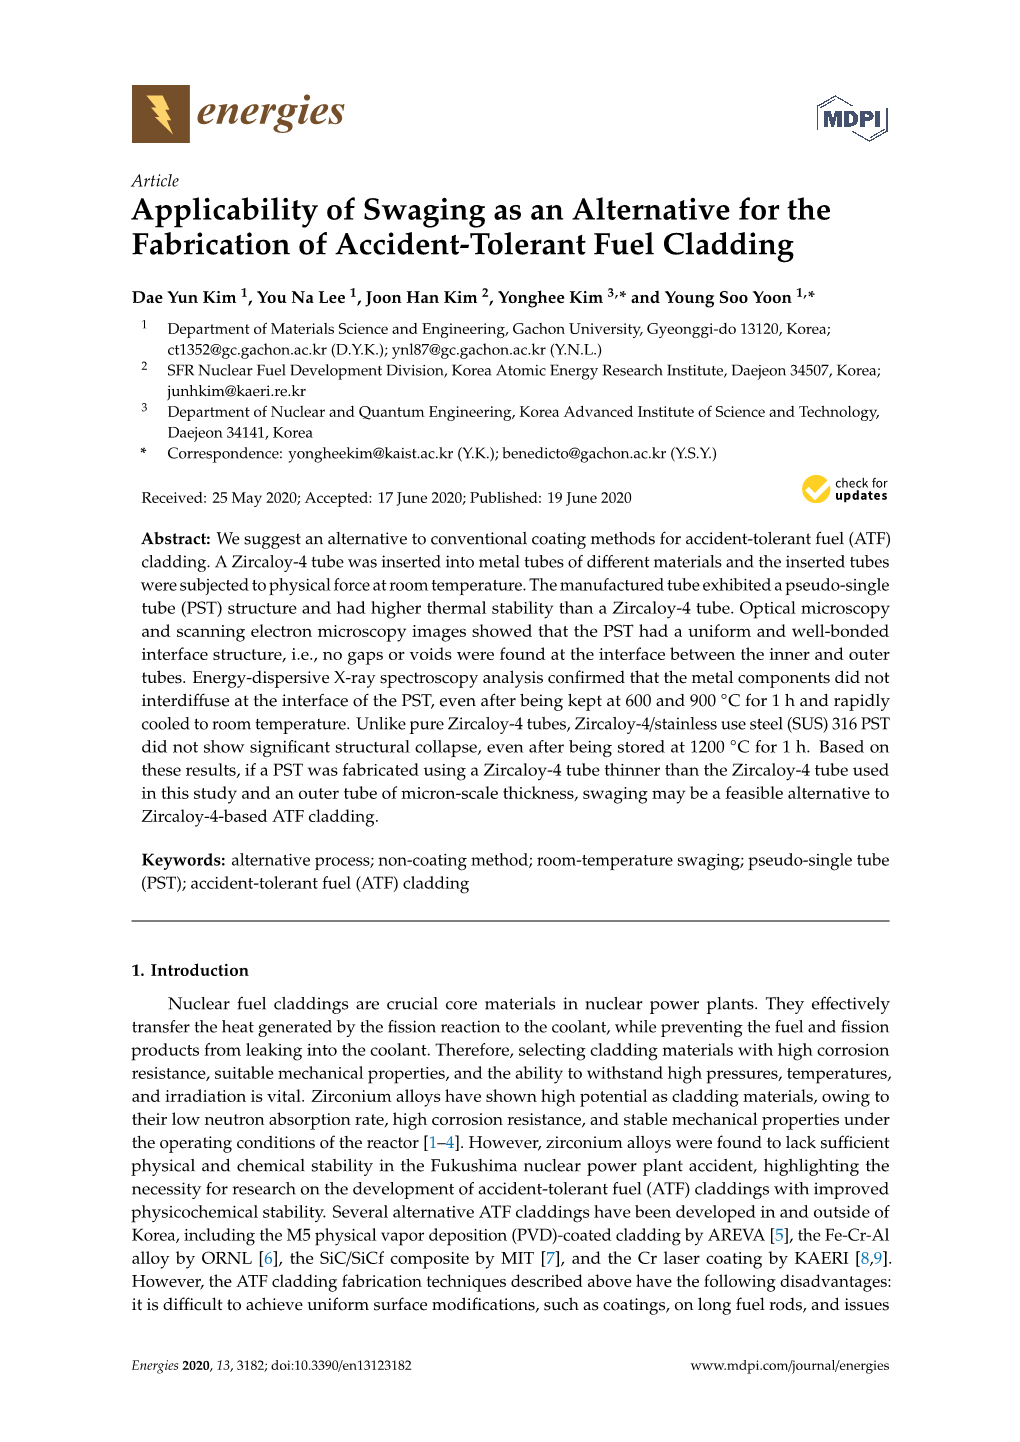 Applicability of Swaging As an Alternative for the Fabrication of Accident-Tolerant Fuel Cladding